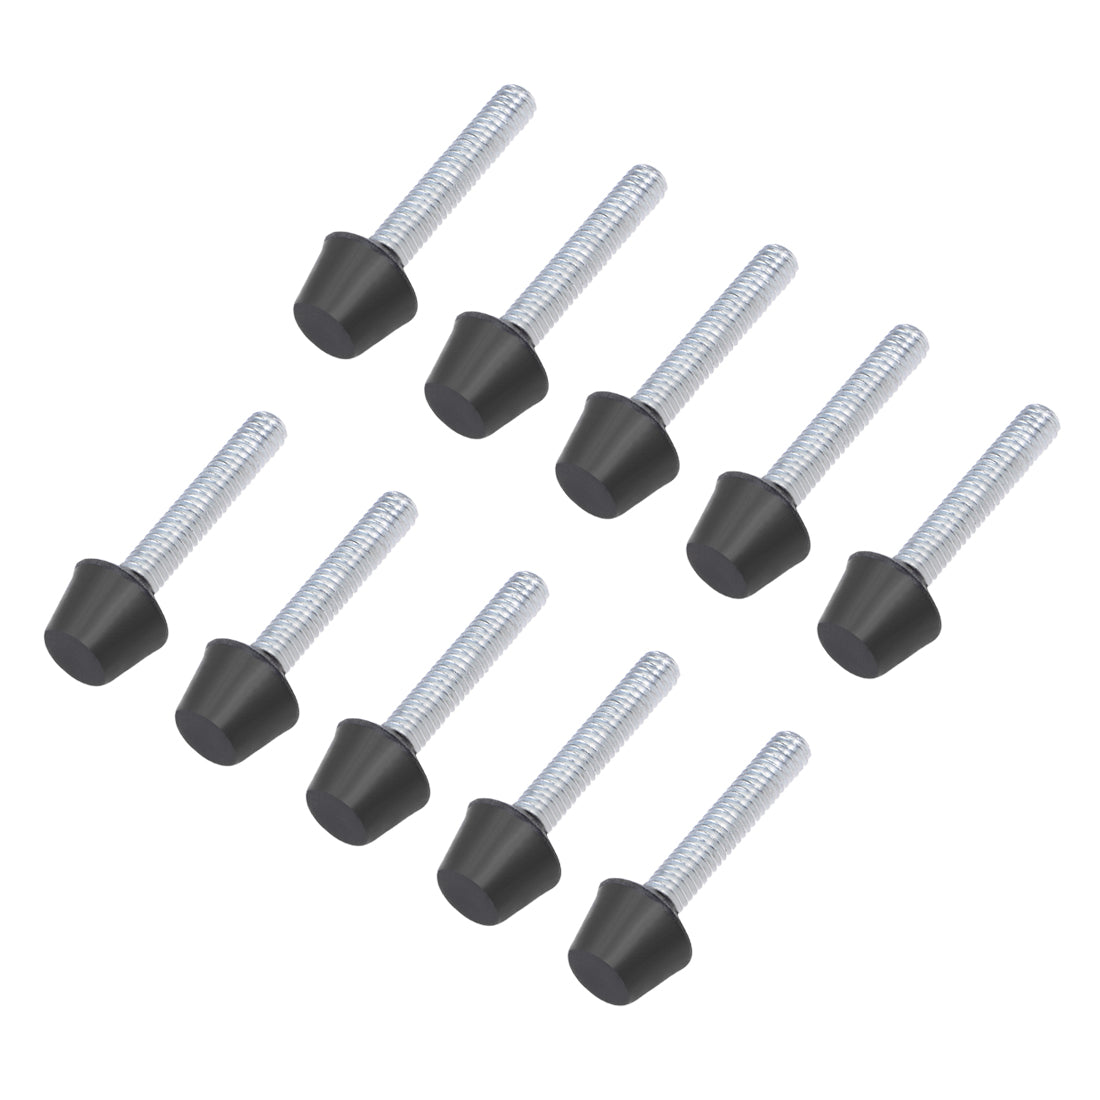 uxcell Uxcell Toggle Clamp Foot Rubber Head Carbon Steel M4x25mm 10pcs